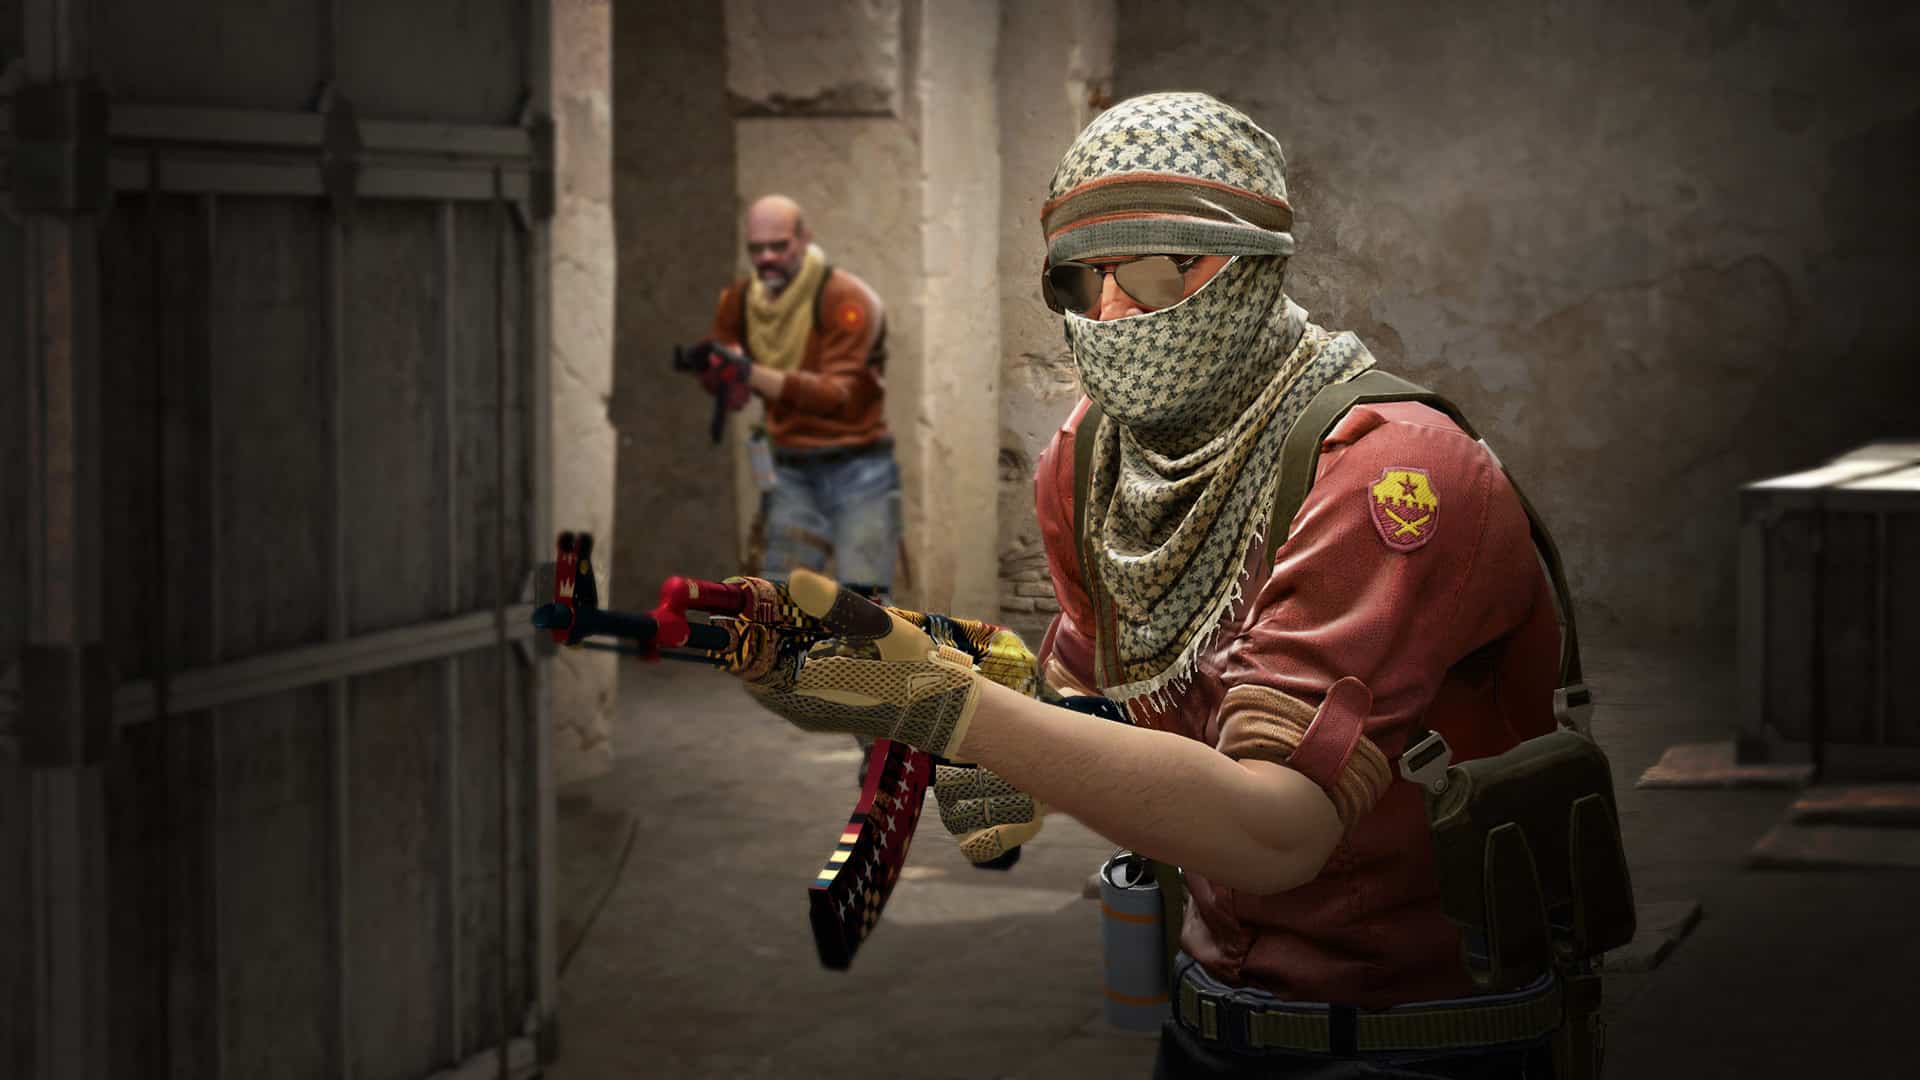 Comfortable Cardboard cs go skin download the new for windows